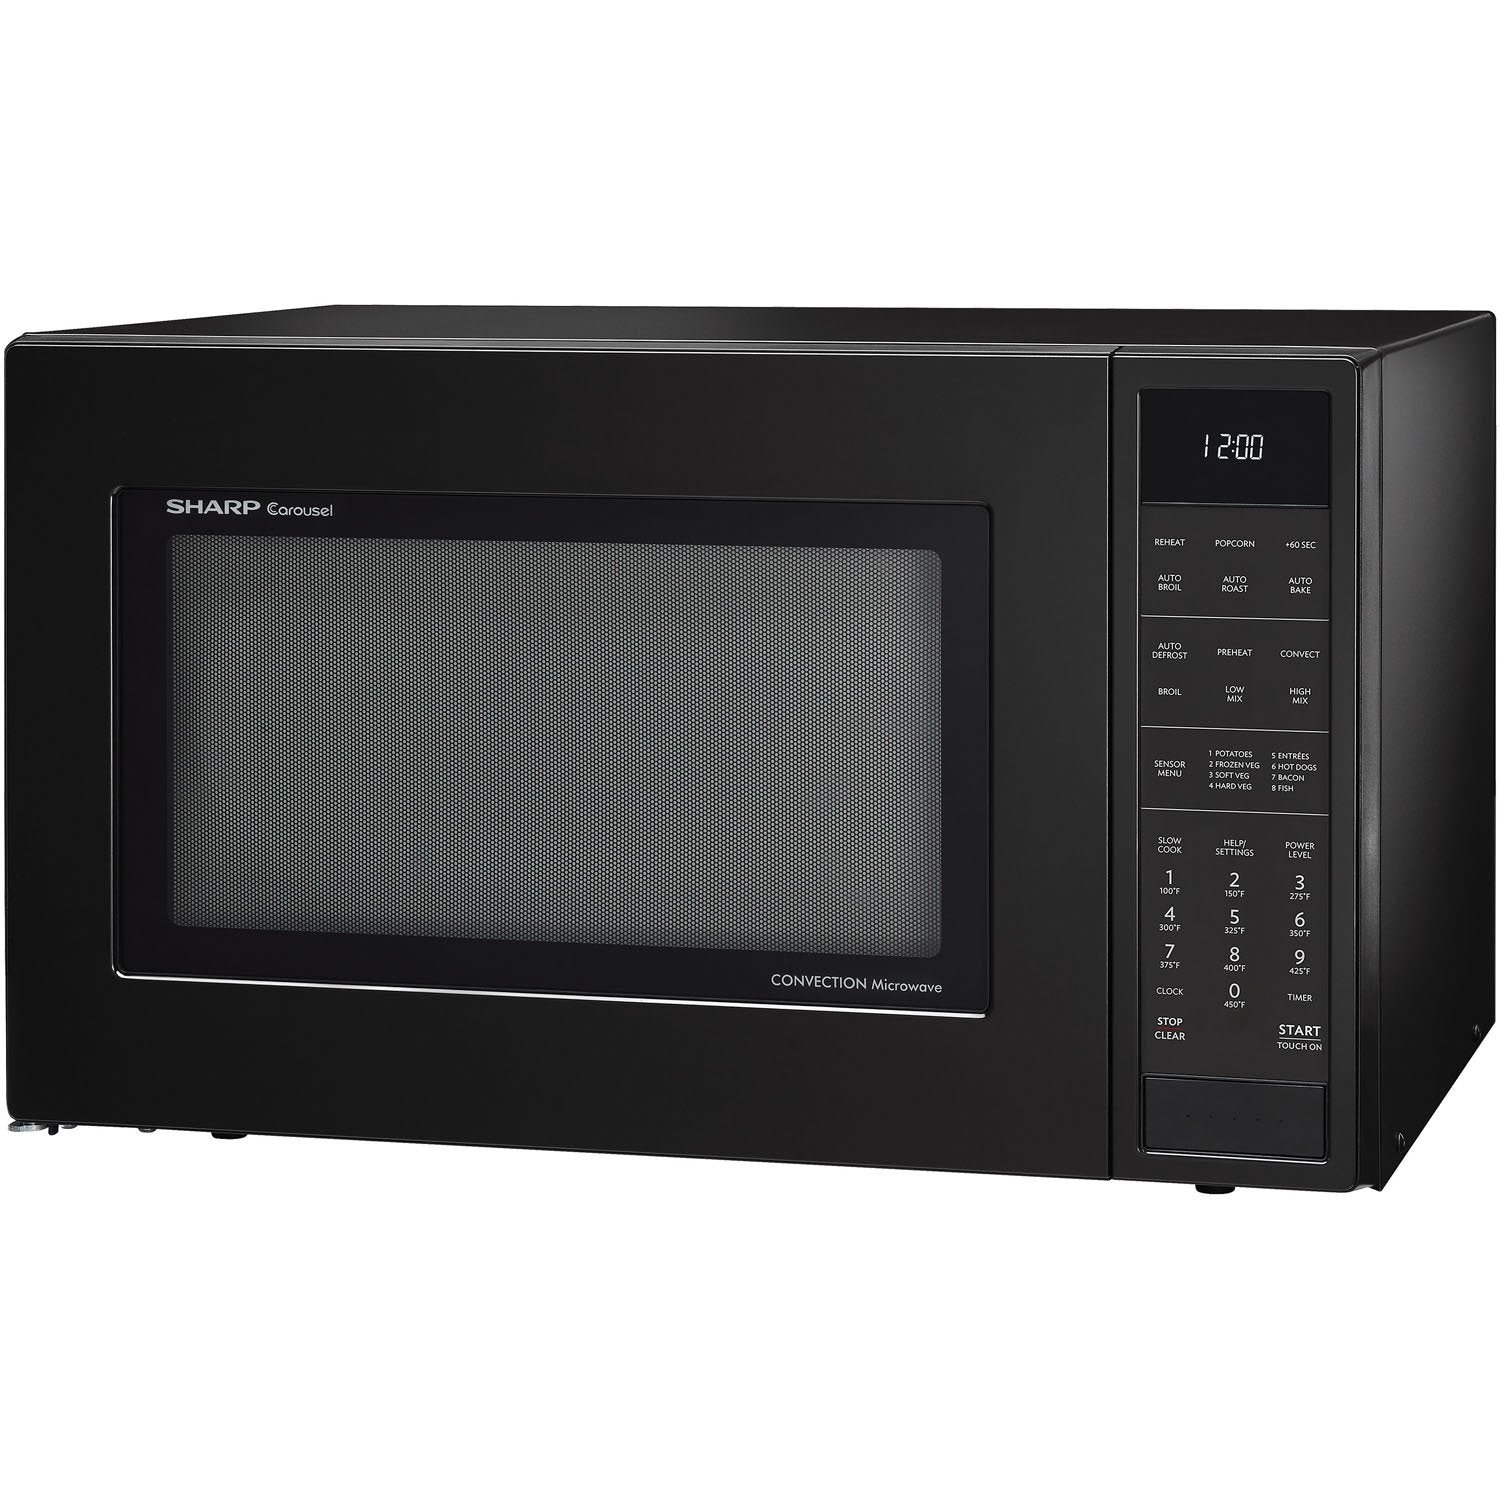 Sharp SMC1585BB 1.5 CF 900W Matte Black Carousel Convection Microwave Oven - Certified Refurbished